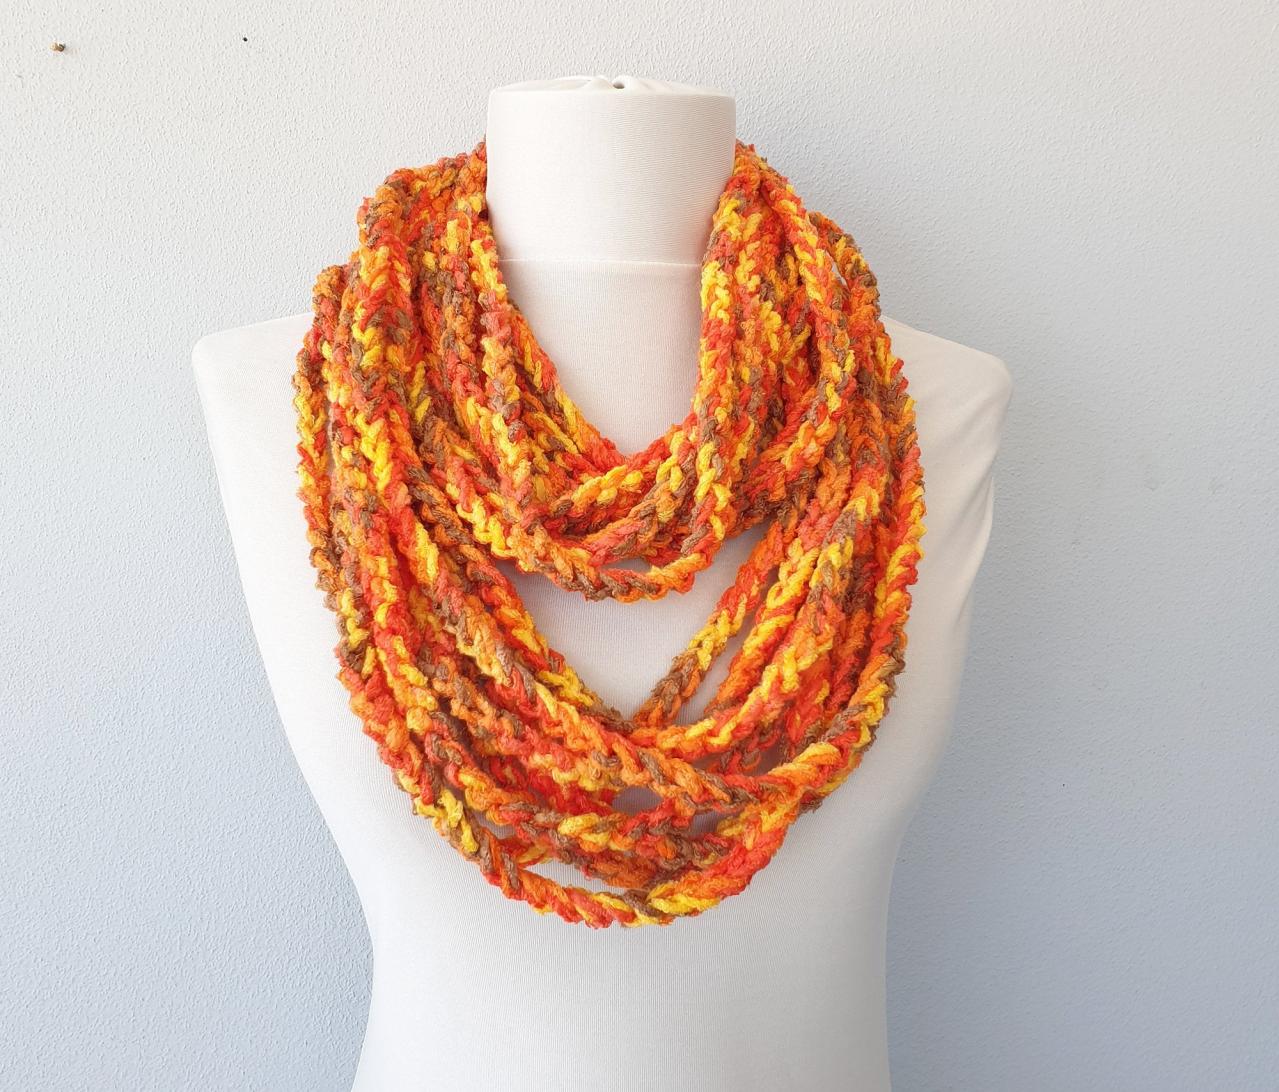 Orange Chain Infinity Scarf, Fall Crochet Scarves For Women, Family Photo Prop, Gift For Her